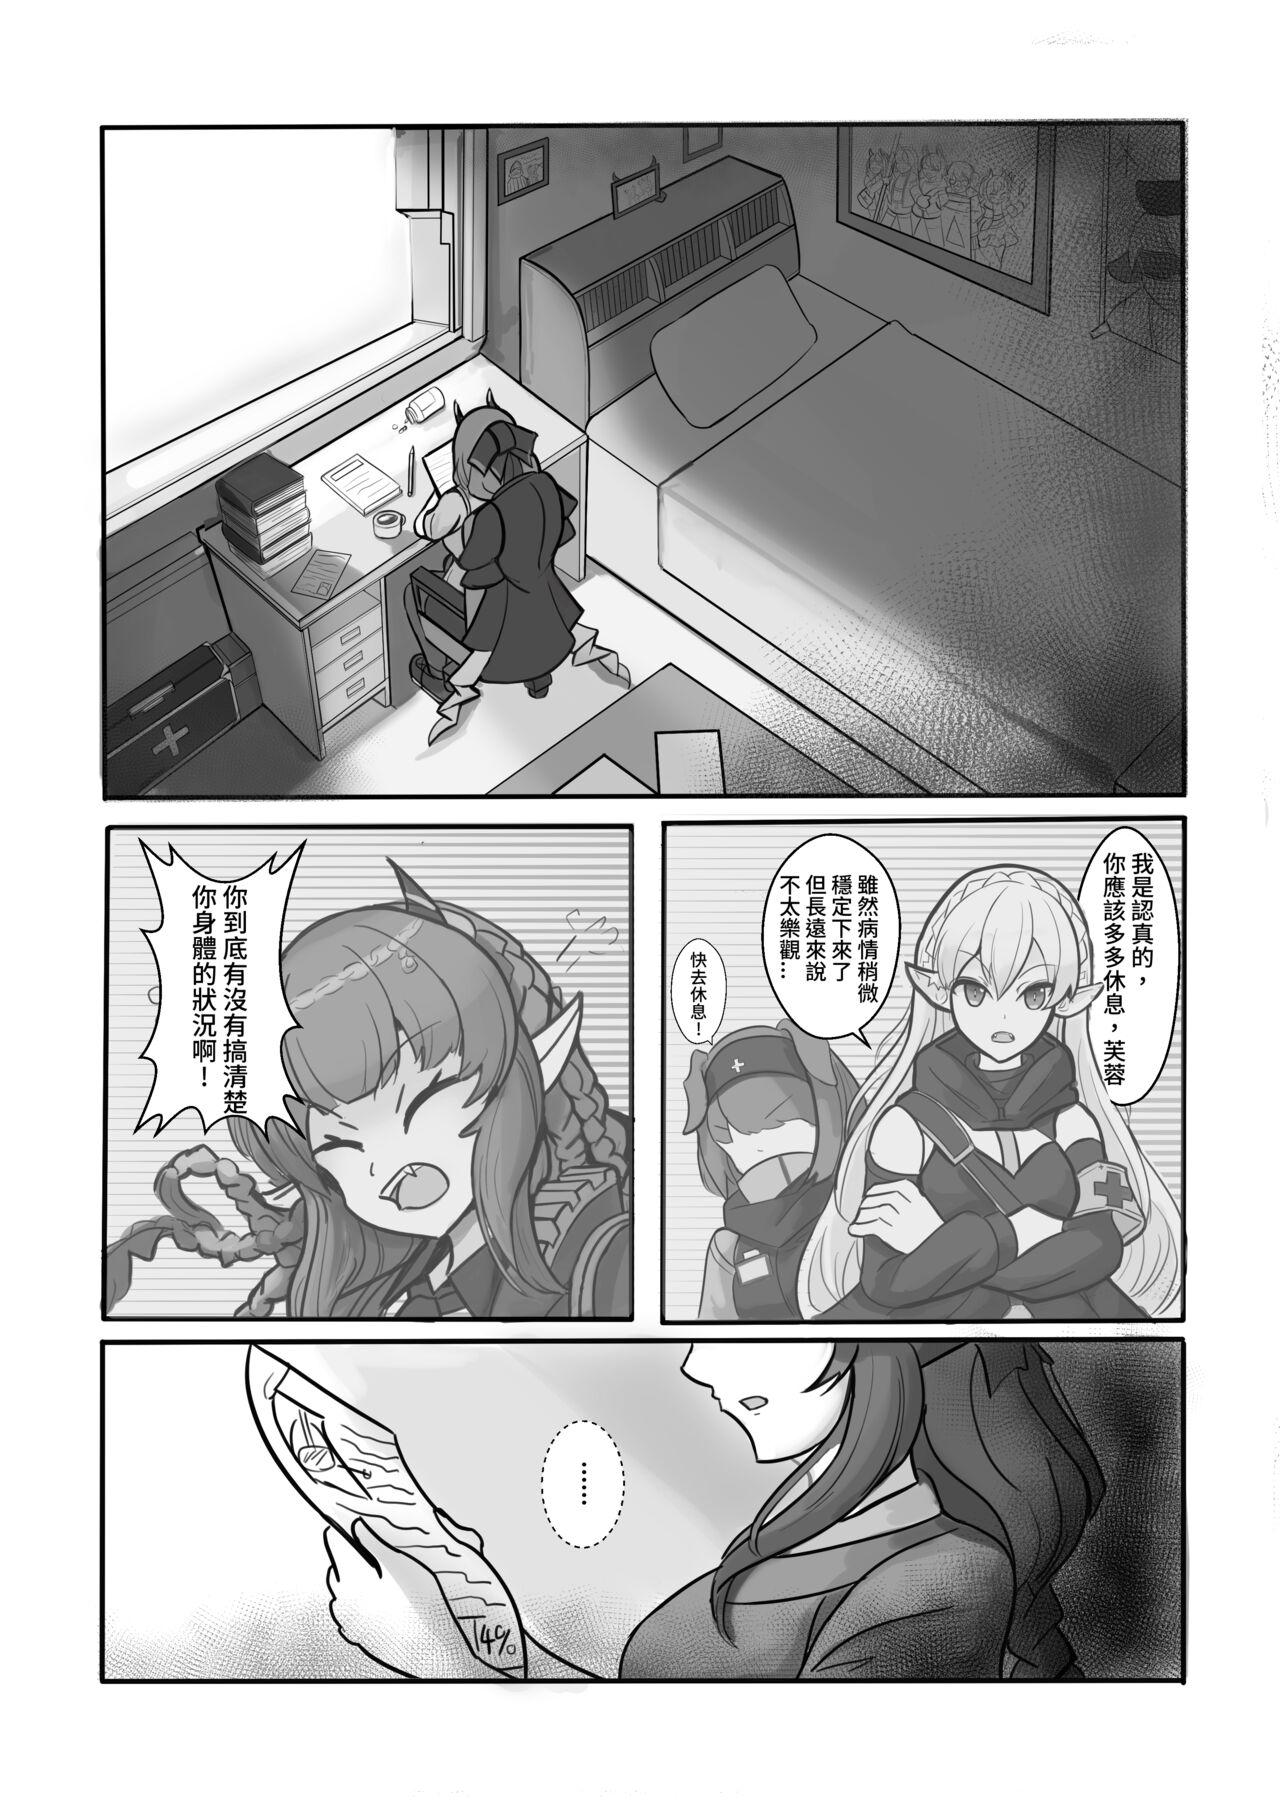 Mamada AfterGlow - Arknights Orgame - Page 7